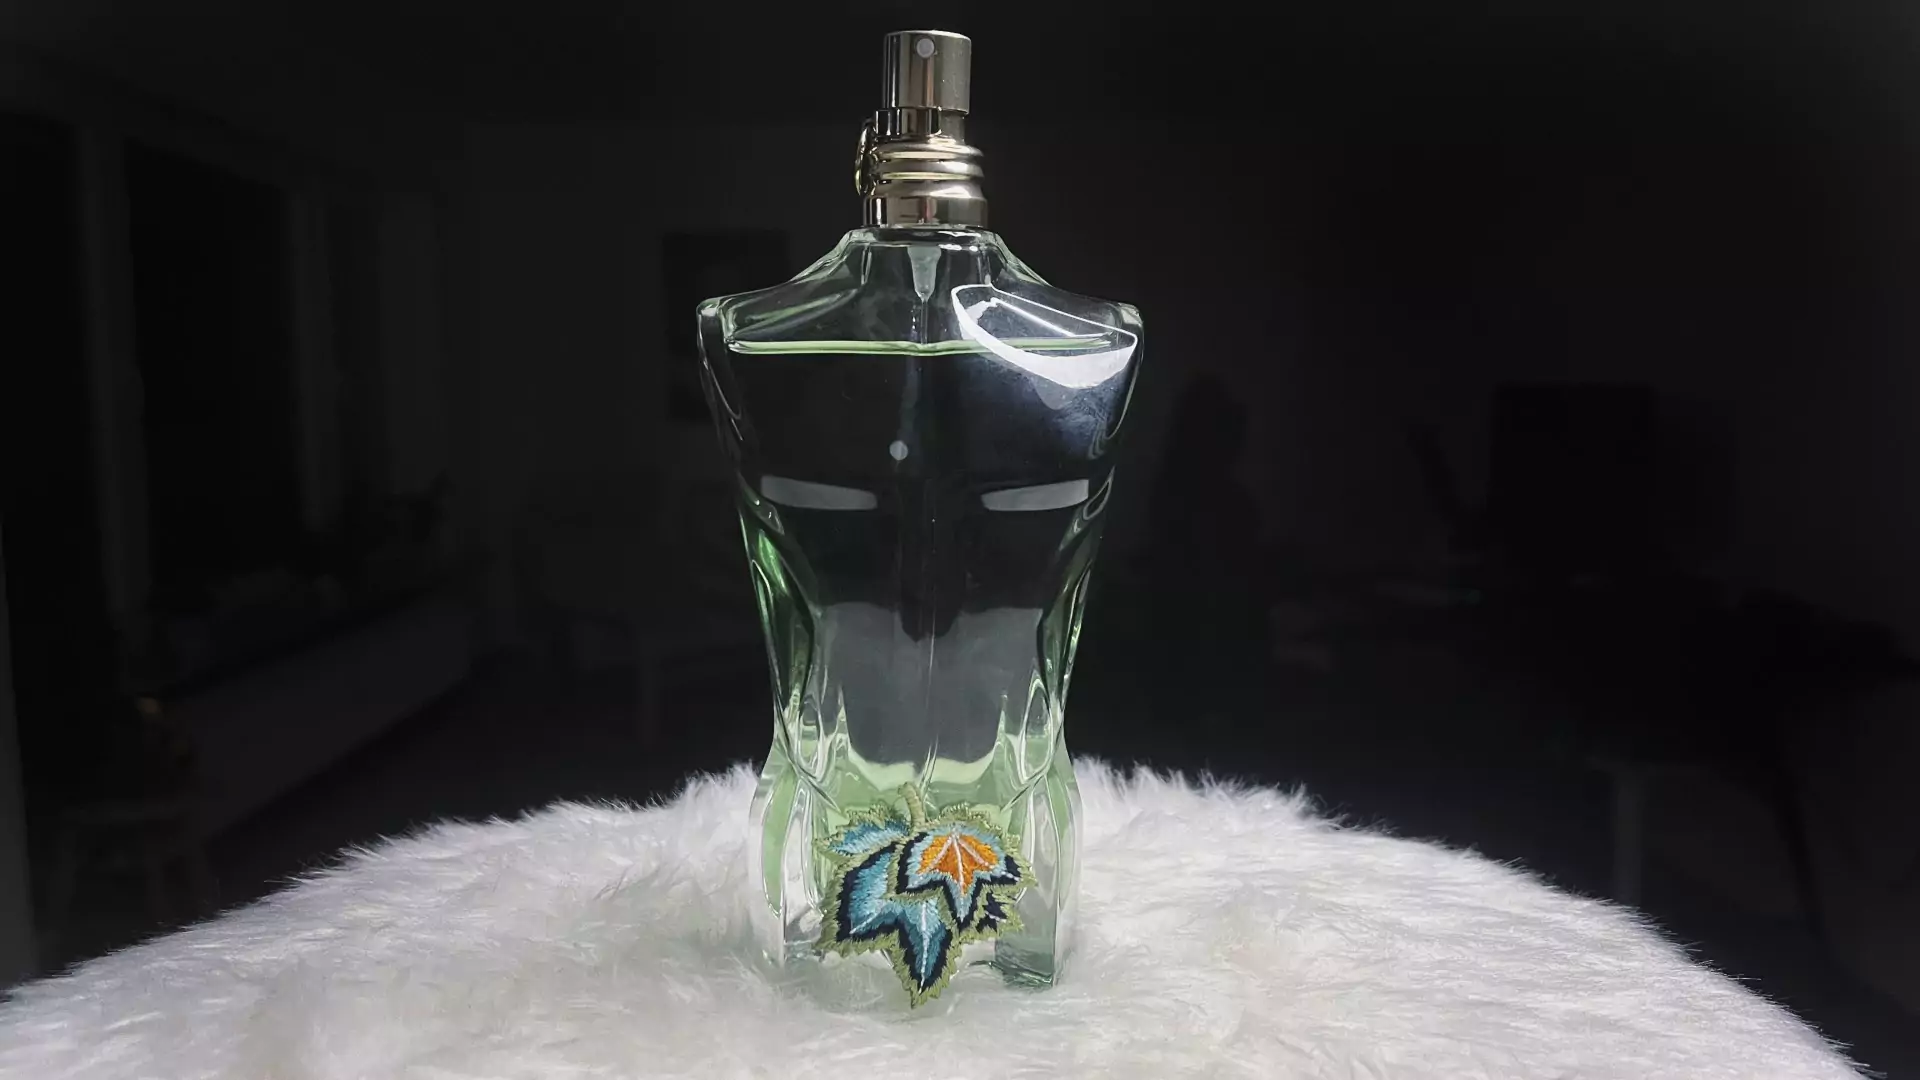 My honest review of the new Le Beau Paradise Garden from Jean Paul Gaultier